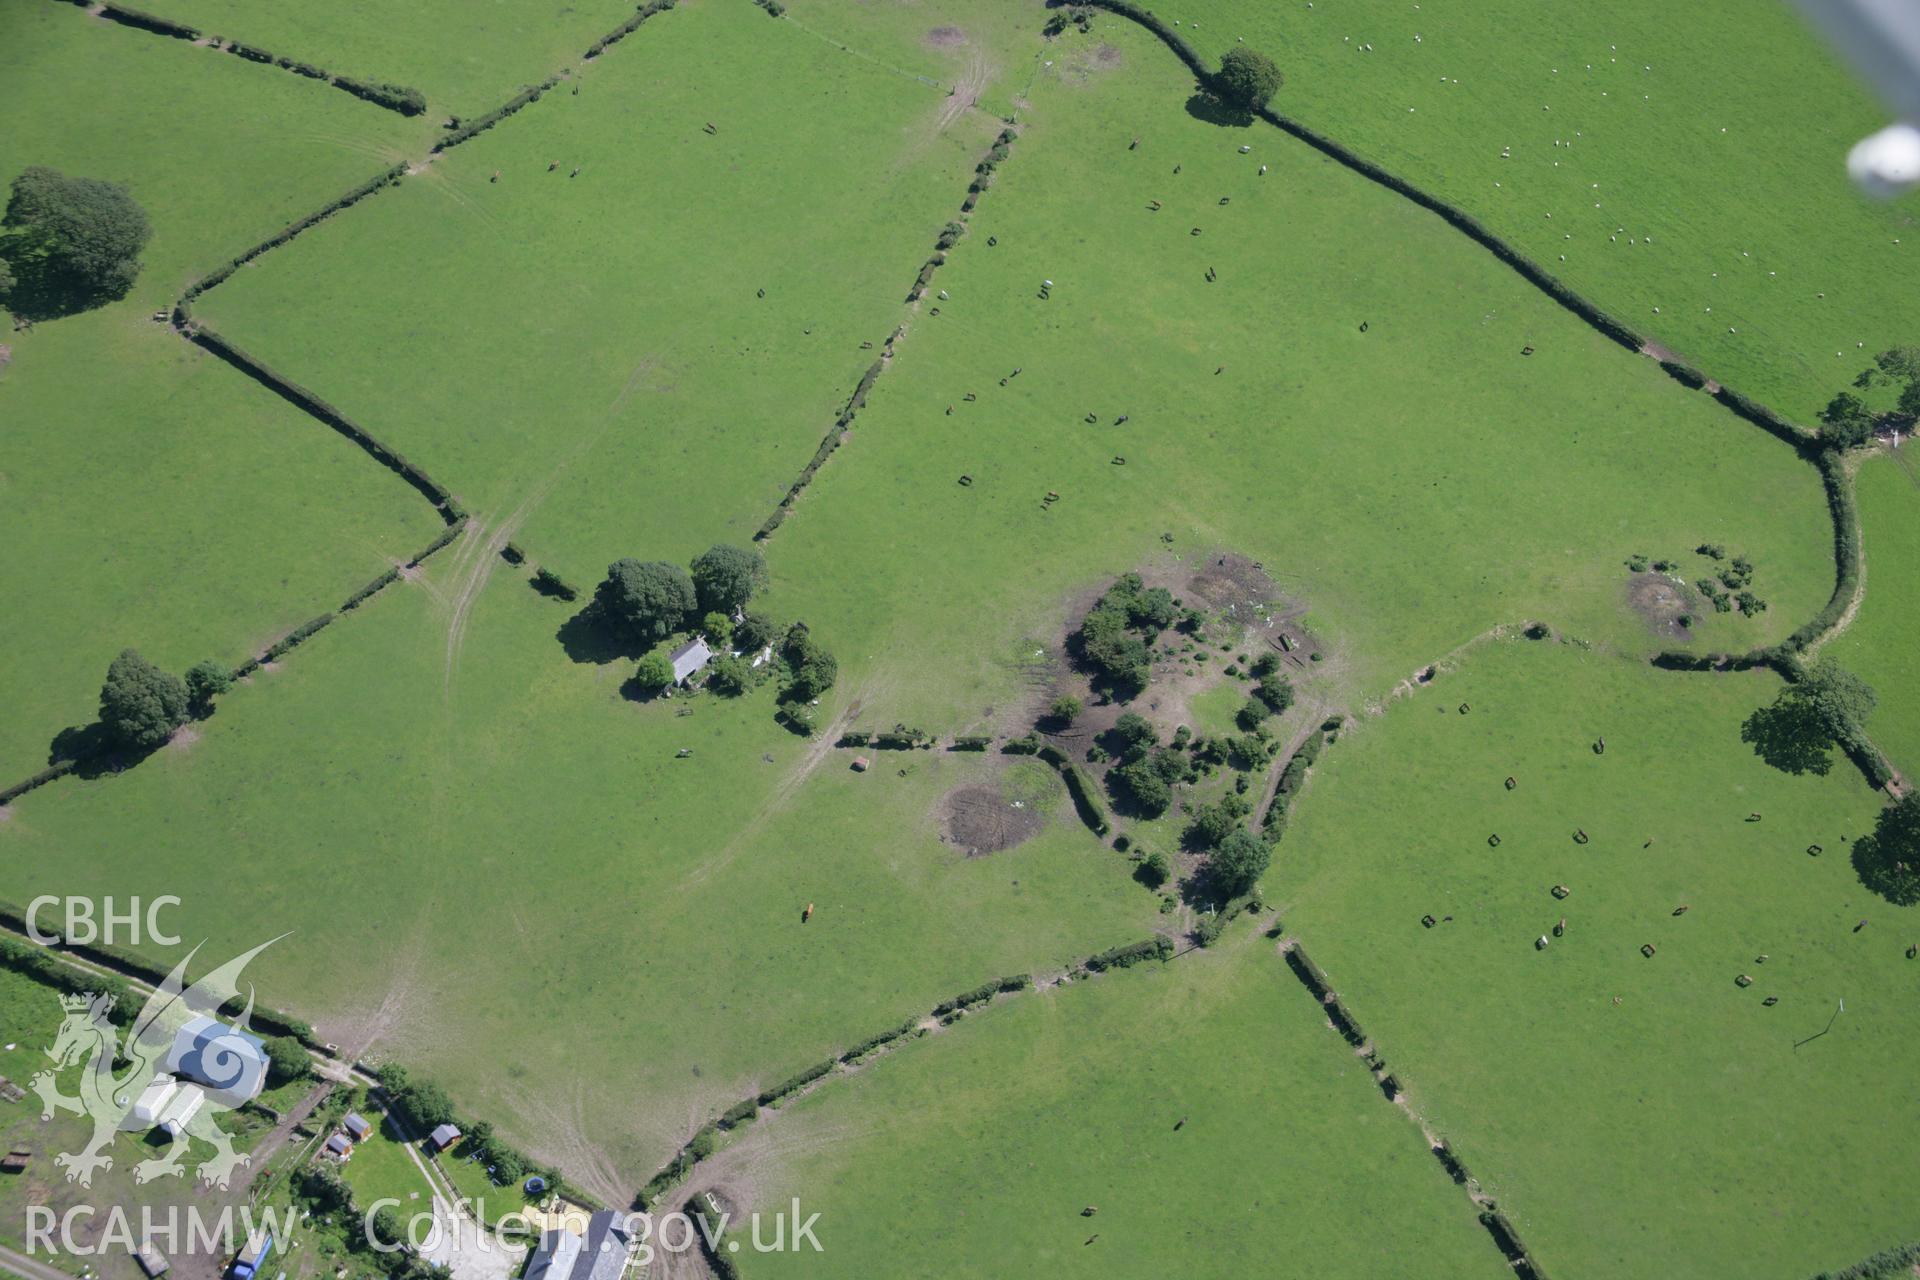 RCAHMW colour oblique aerial photograph of Bryn Digrif Mounds IV and V. Taken on 31 July 2007 by Toby Driver